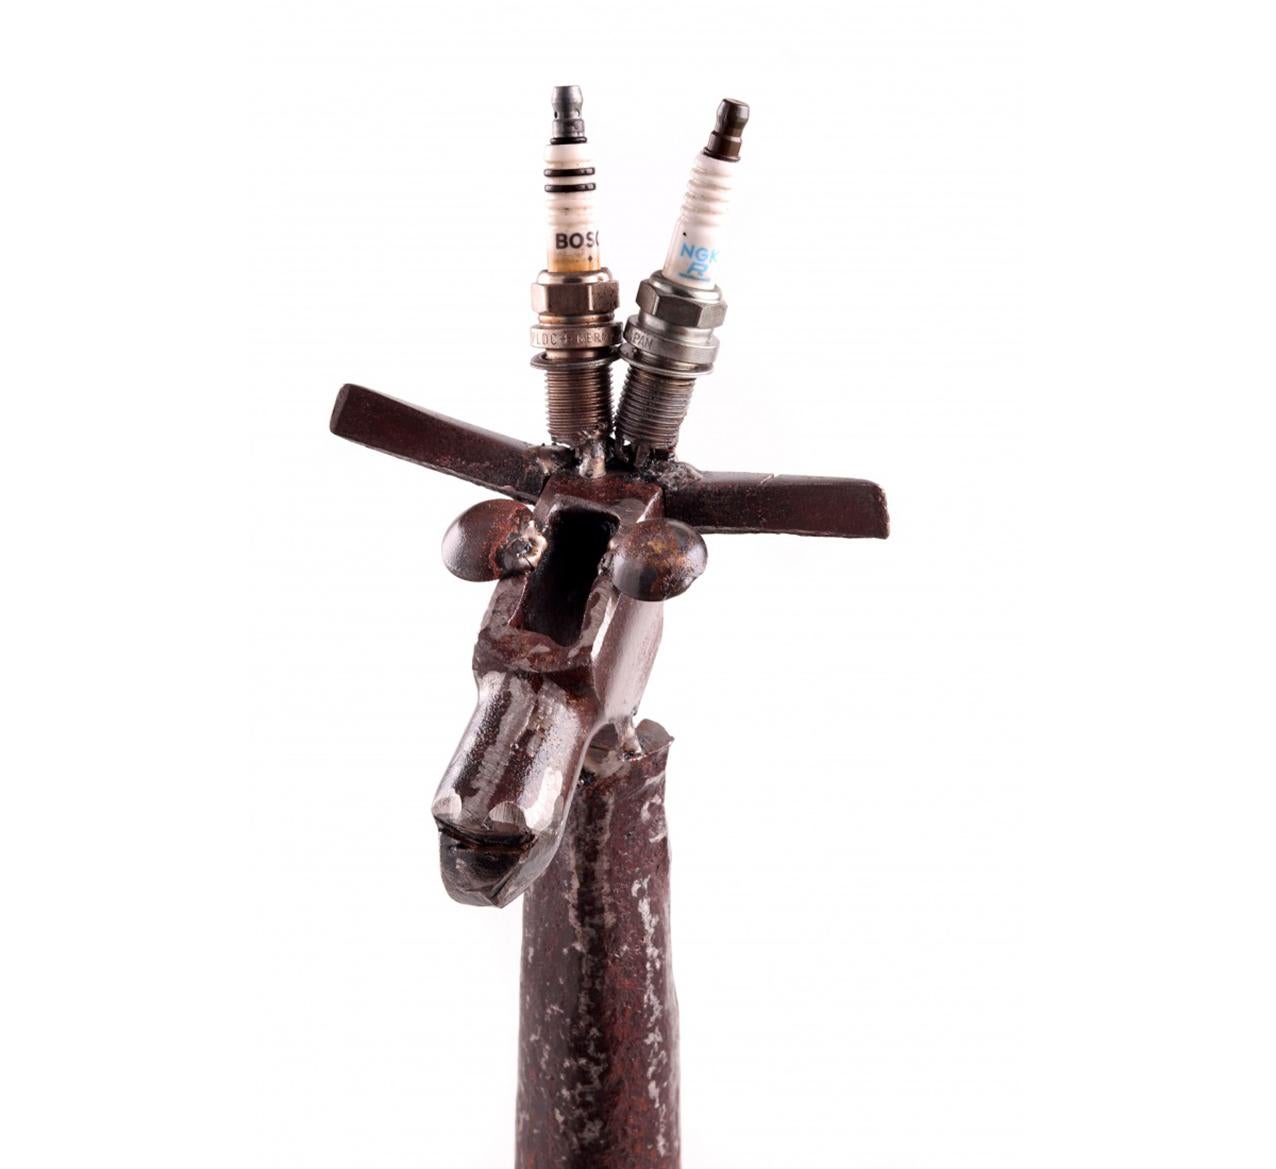 Ivorian Contemporary Giraffe Iron Sculpture, with Use of Tools and Other Objects C20 For Sale